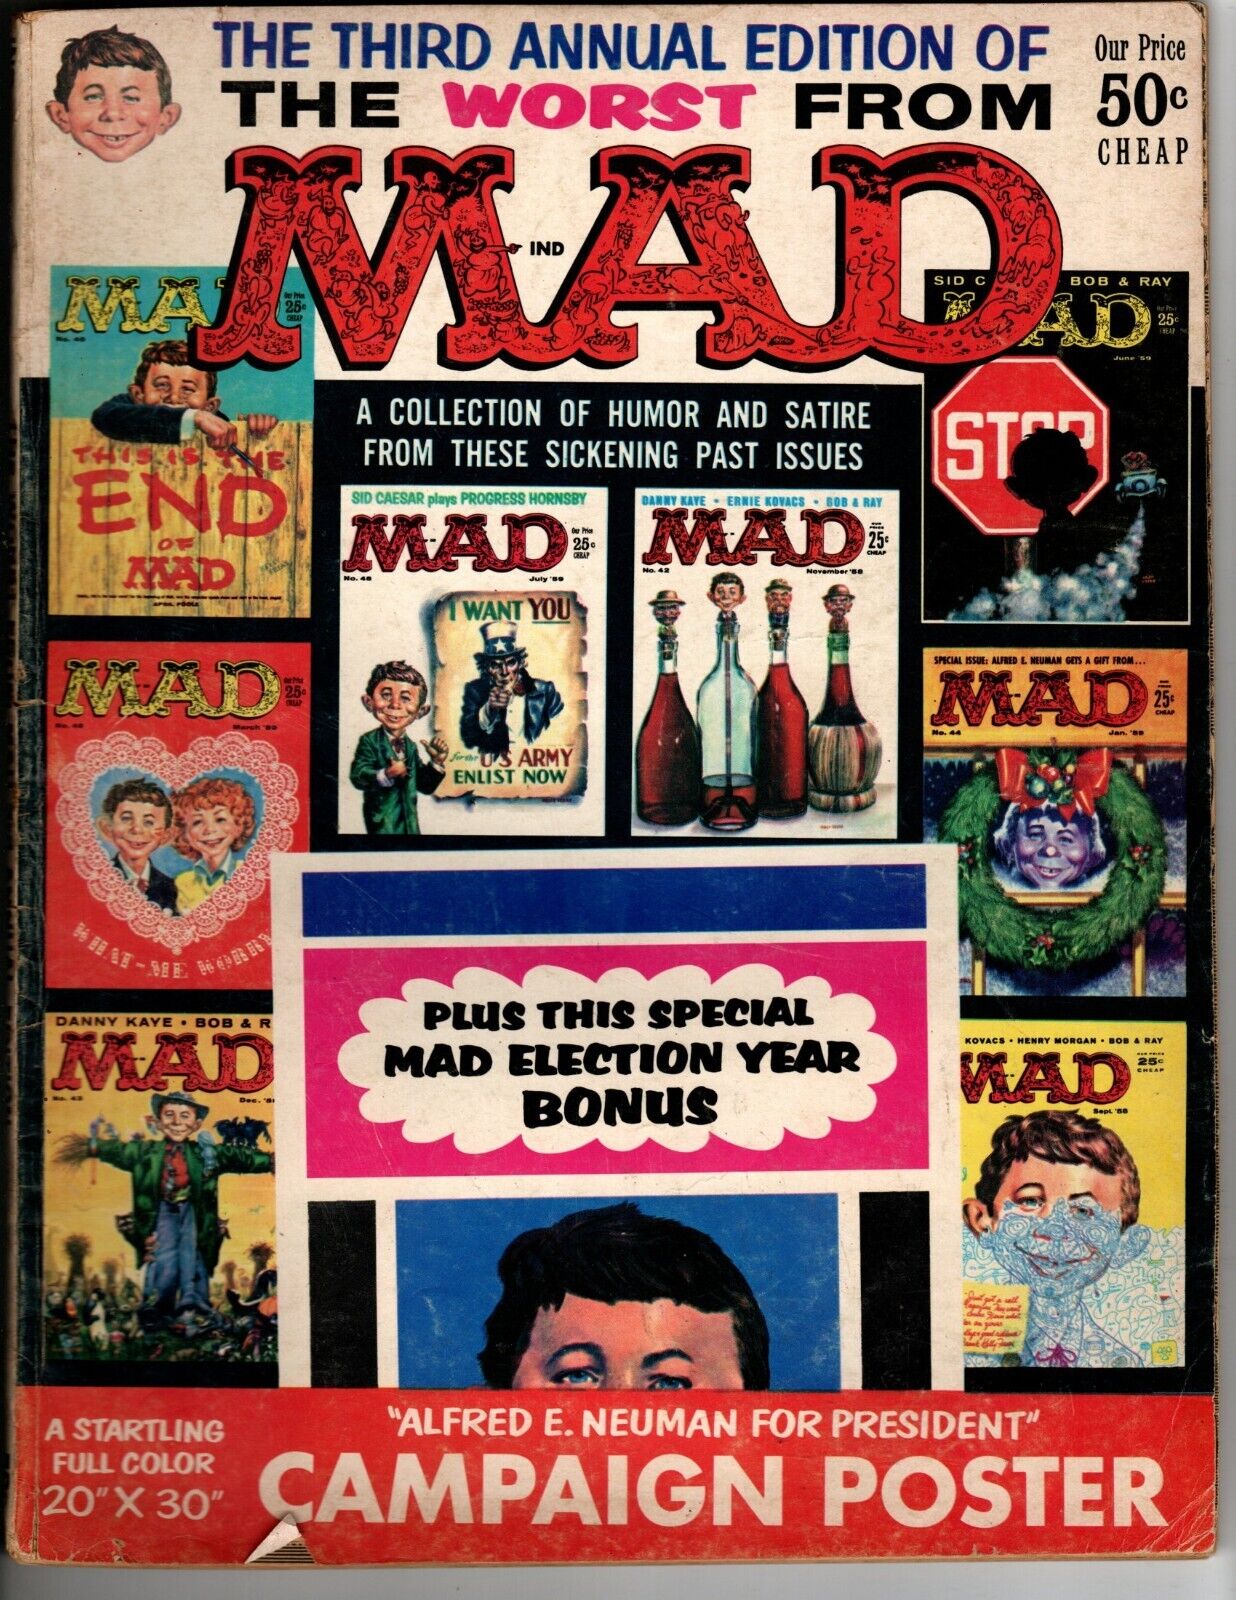 Worst From Mad #3 without Poster, Very Good Condition